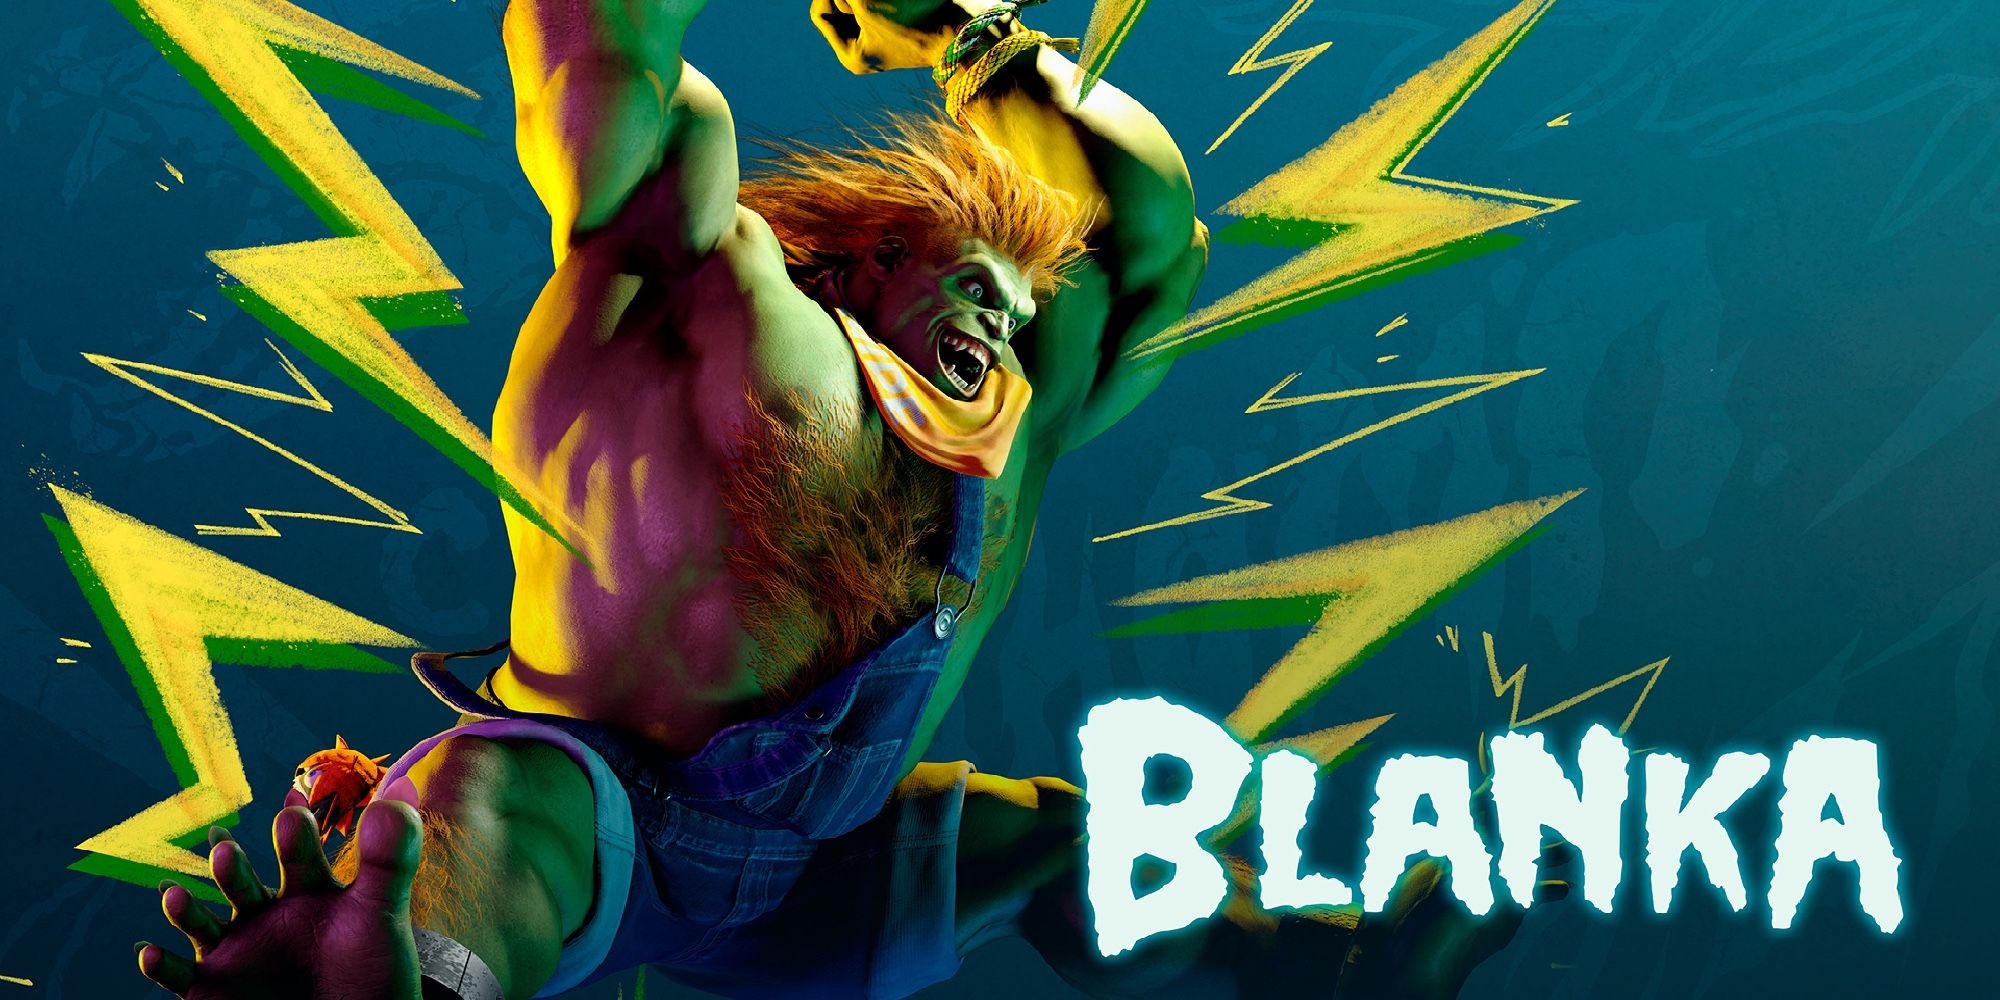 Returning character in Street Fighter Blanka, with green skin and vibrant orange hair, jumping with legs outstretched.